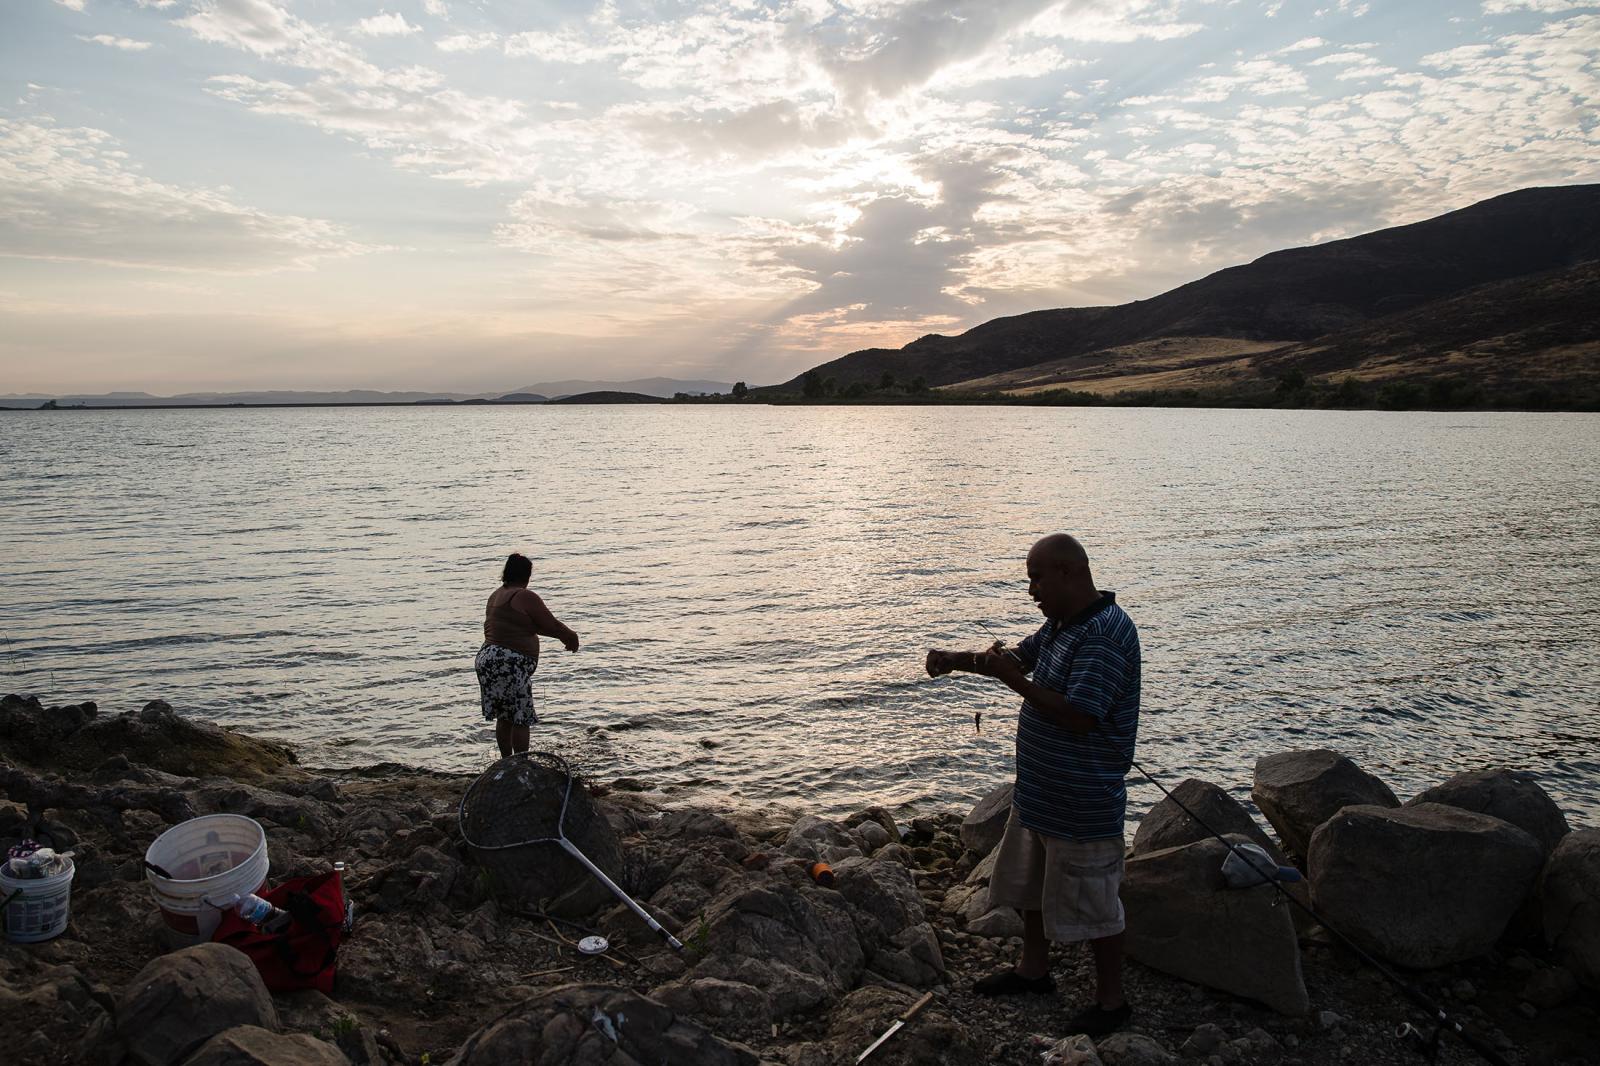 Jose Batras fishes while his wife Maria Estrada helps him at Lake Skinner in Winchester, California on August 11, 2021. Lake Skinner is around 80 percent full. Wheras across Northern California reservoirs are at low levels.